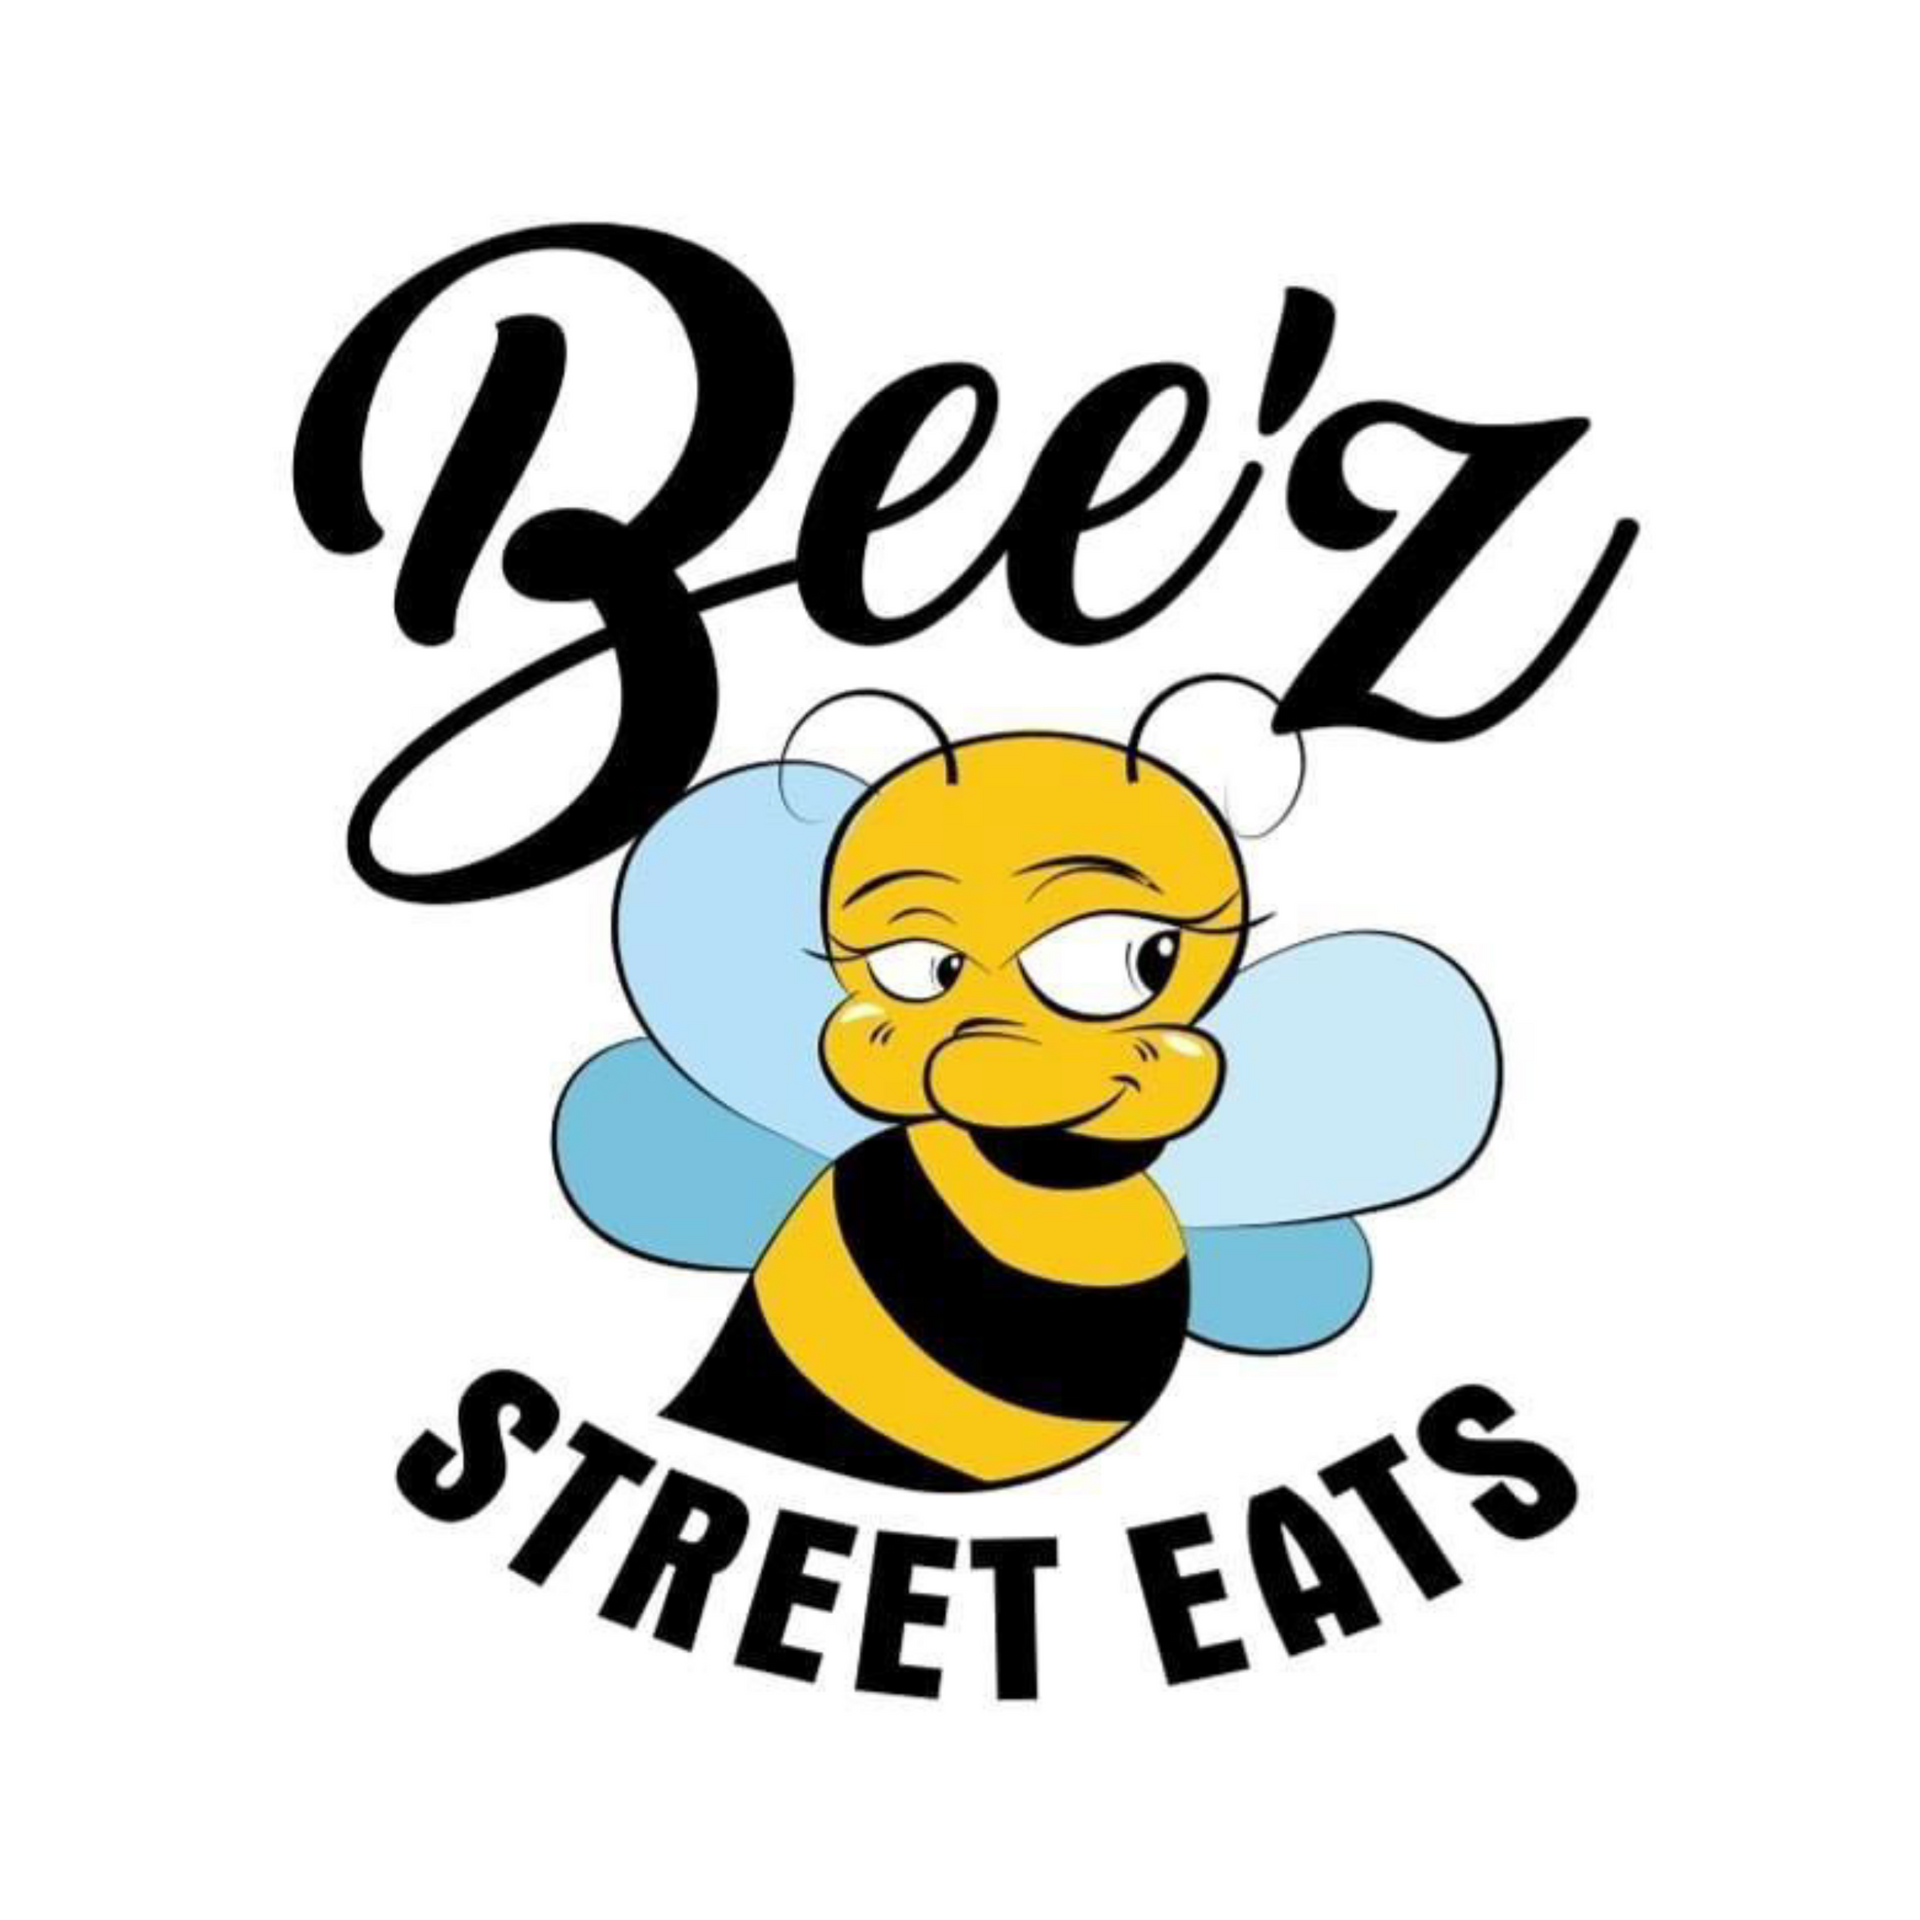 the logo for bee 's street eats has a bee on it .